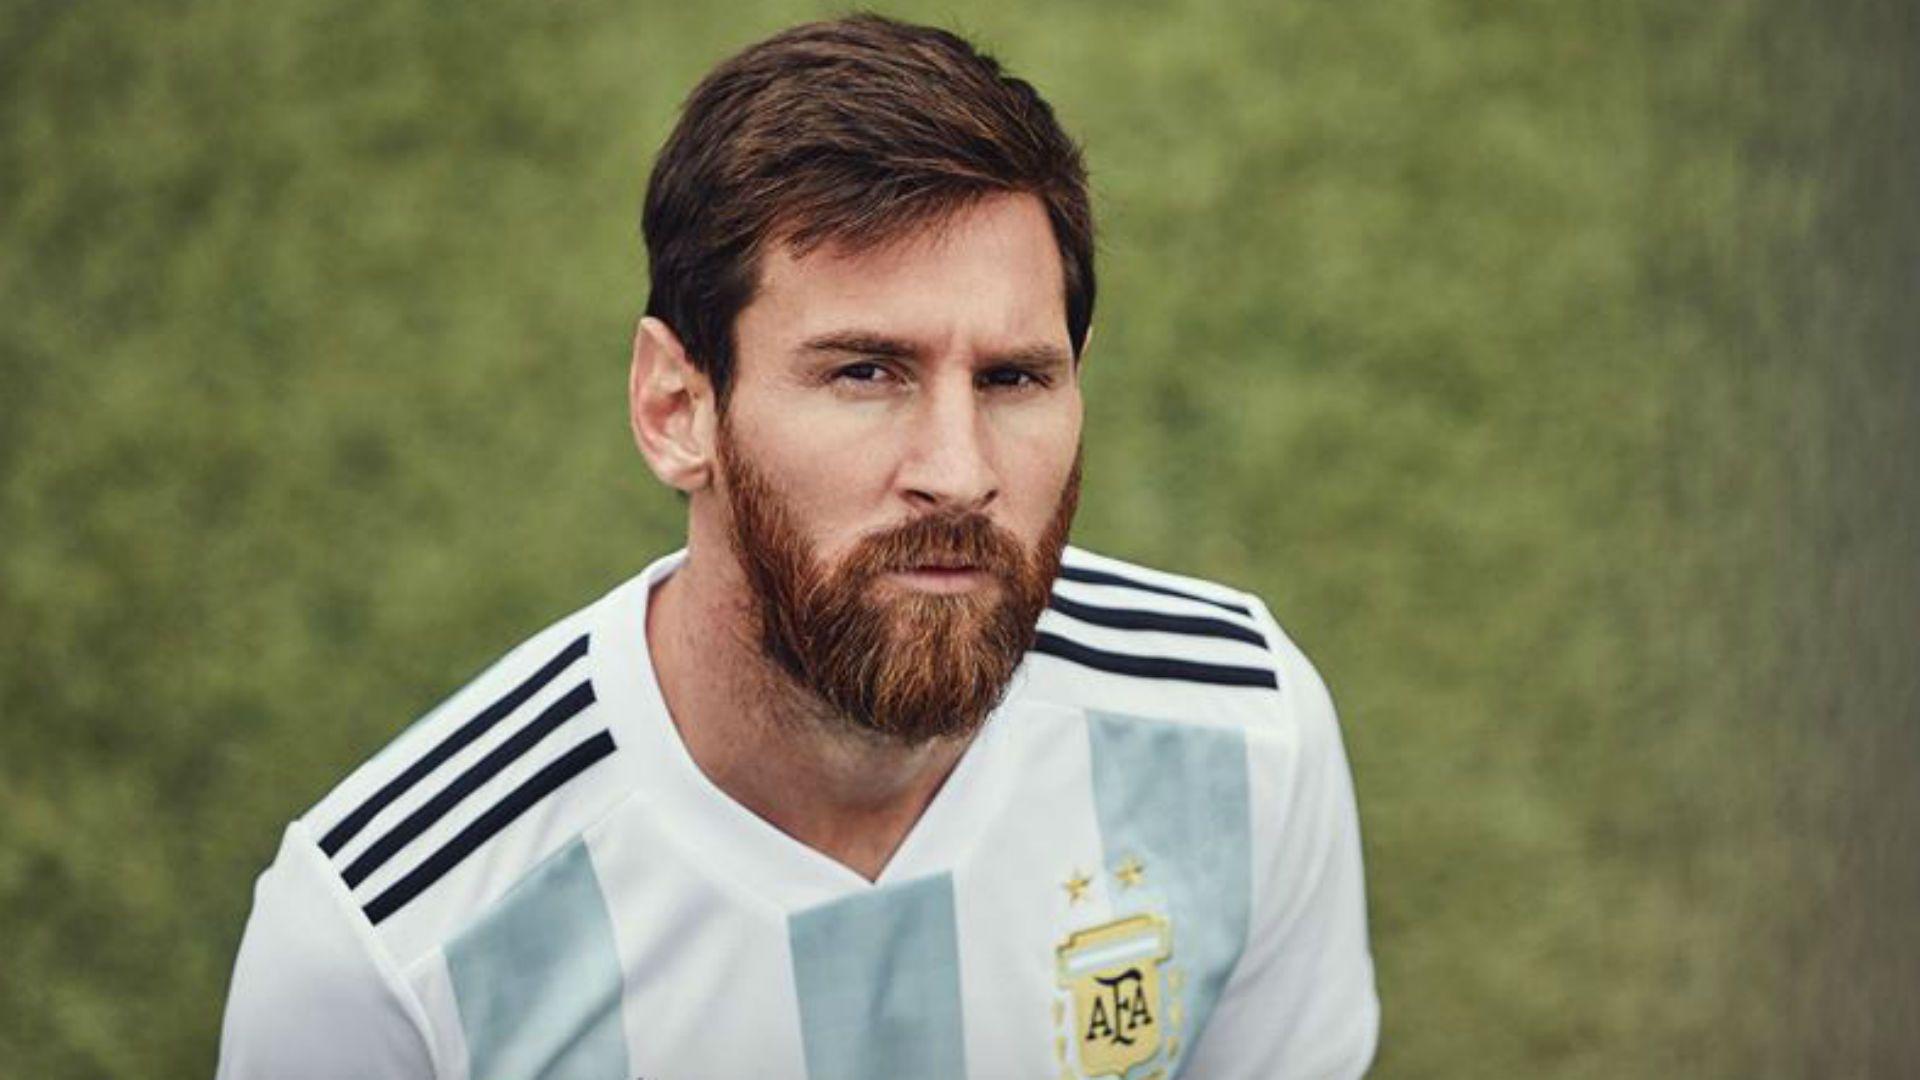 Argentina World cup 2018 Jersey, Kits Provider